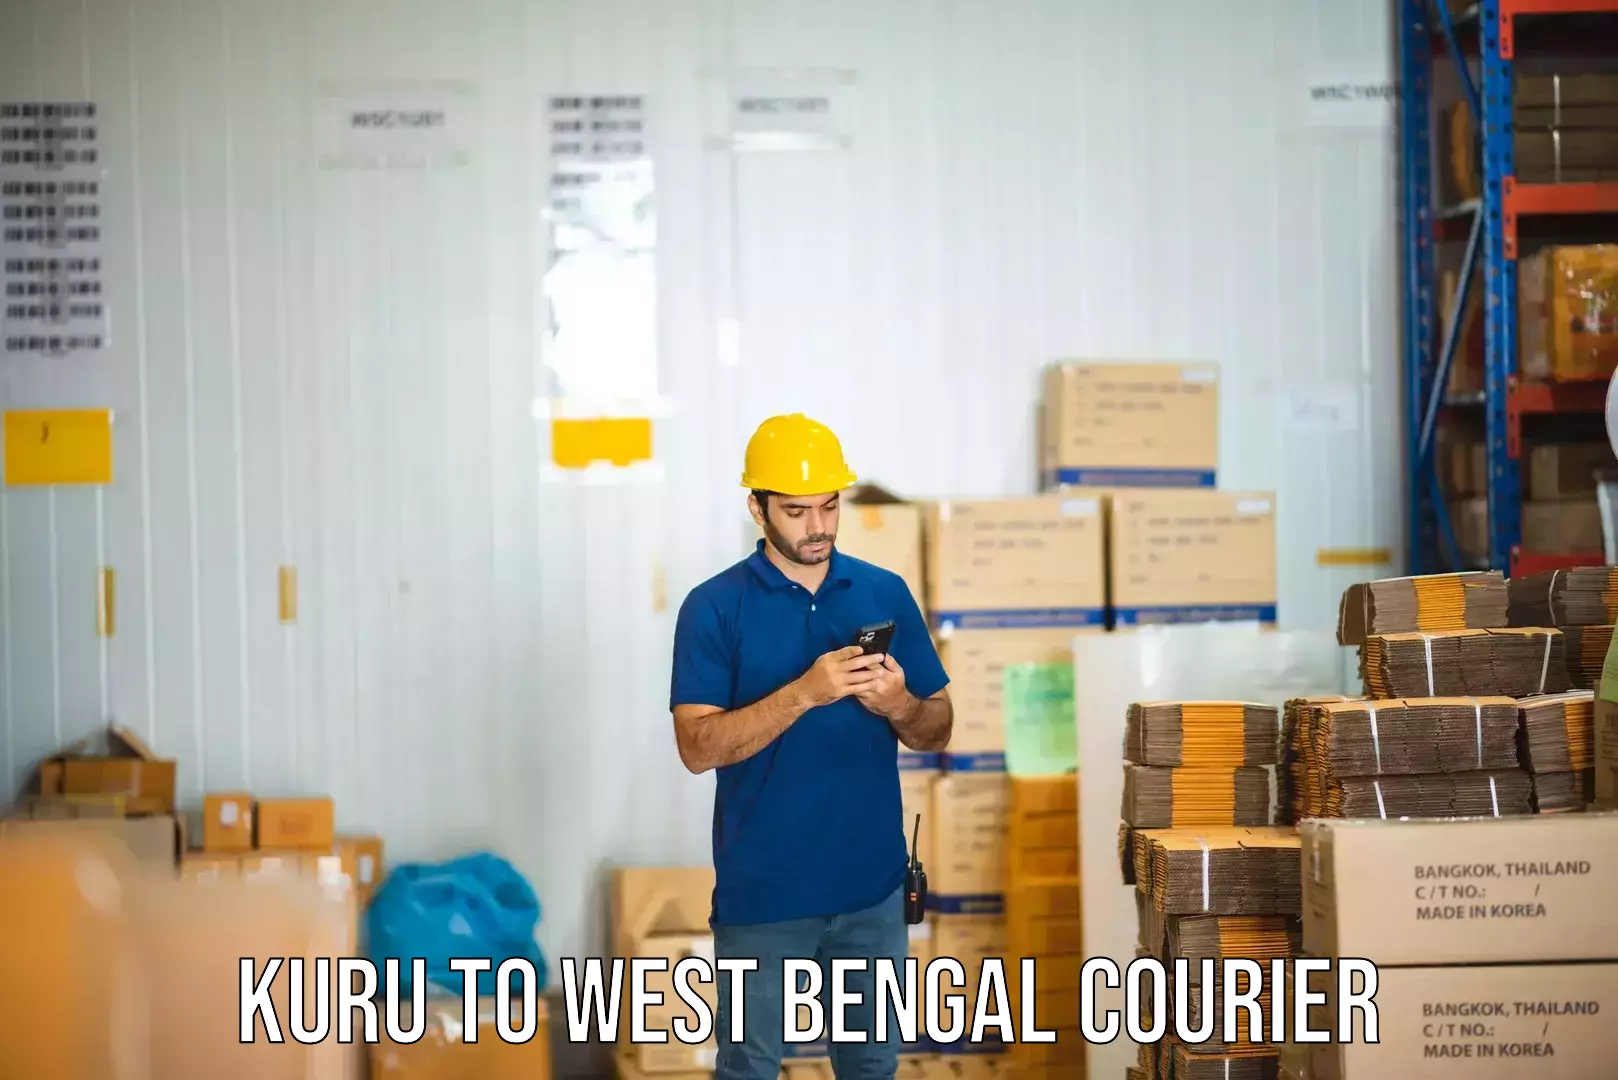 End-to-end delivery in Kuru to West Bengal